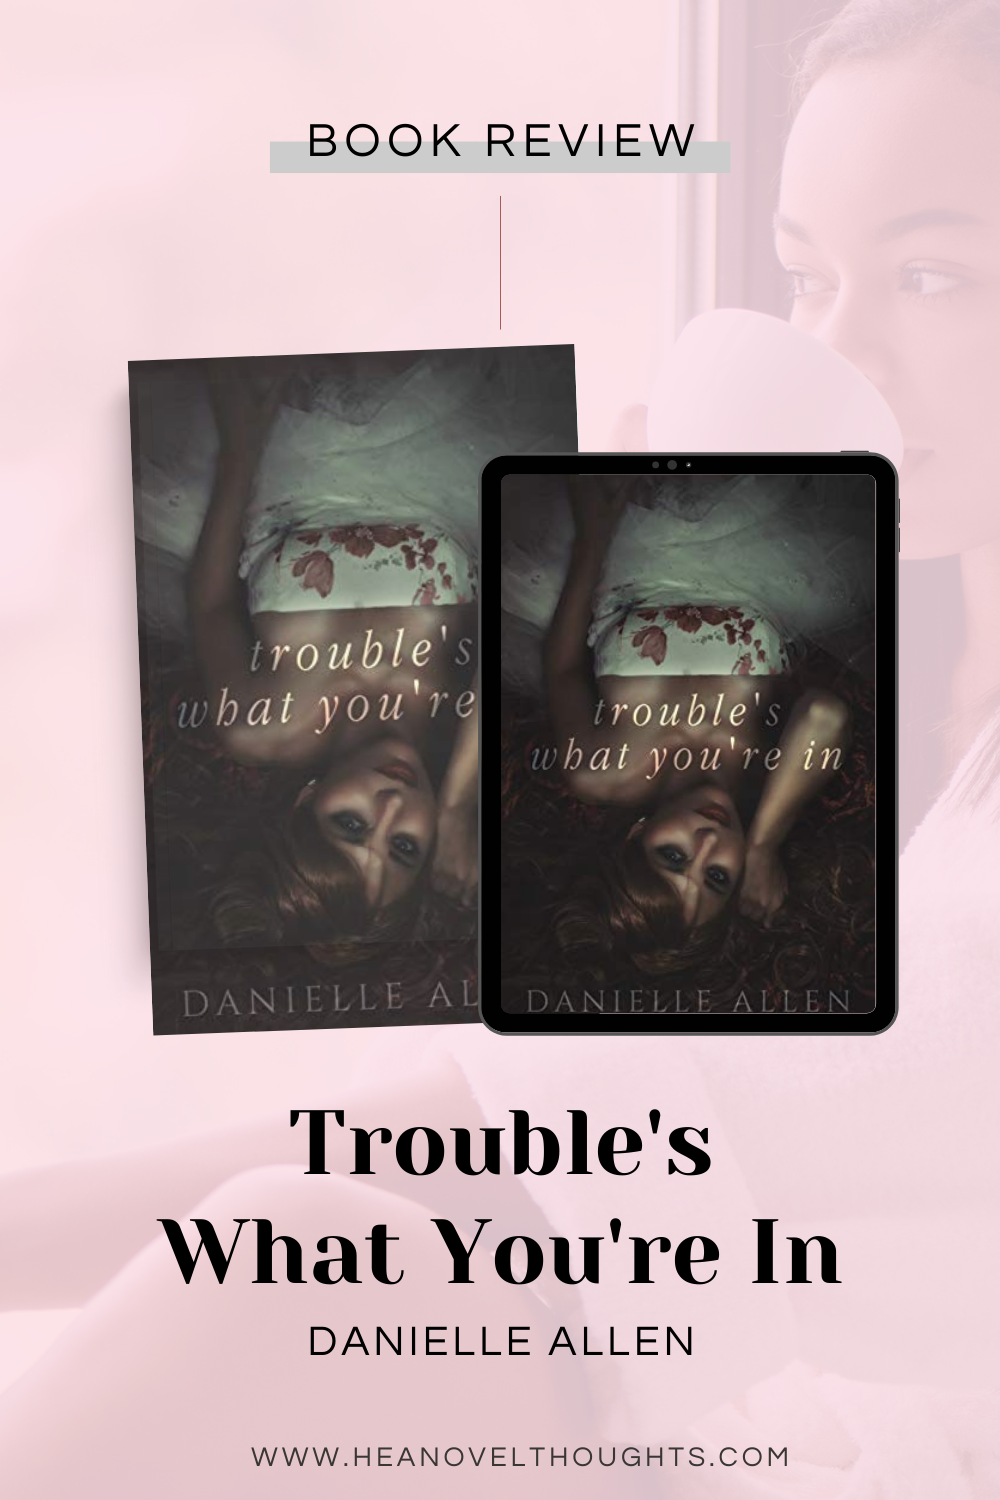 Trouble’s What You’re In by Danielle Allen